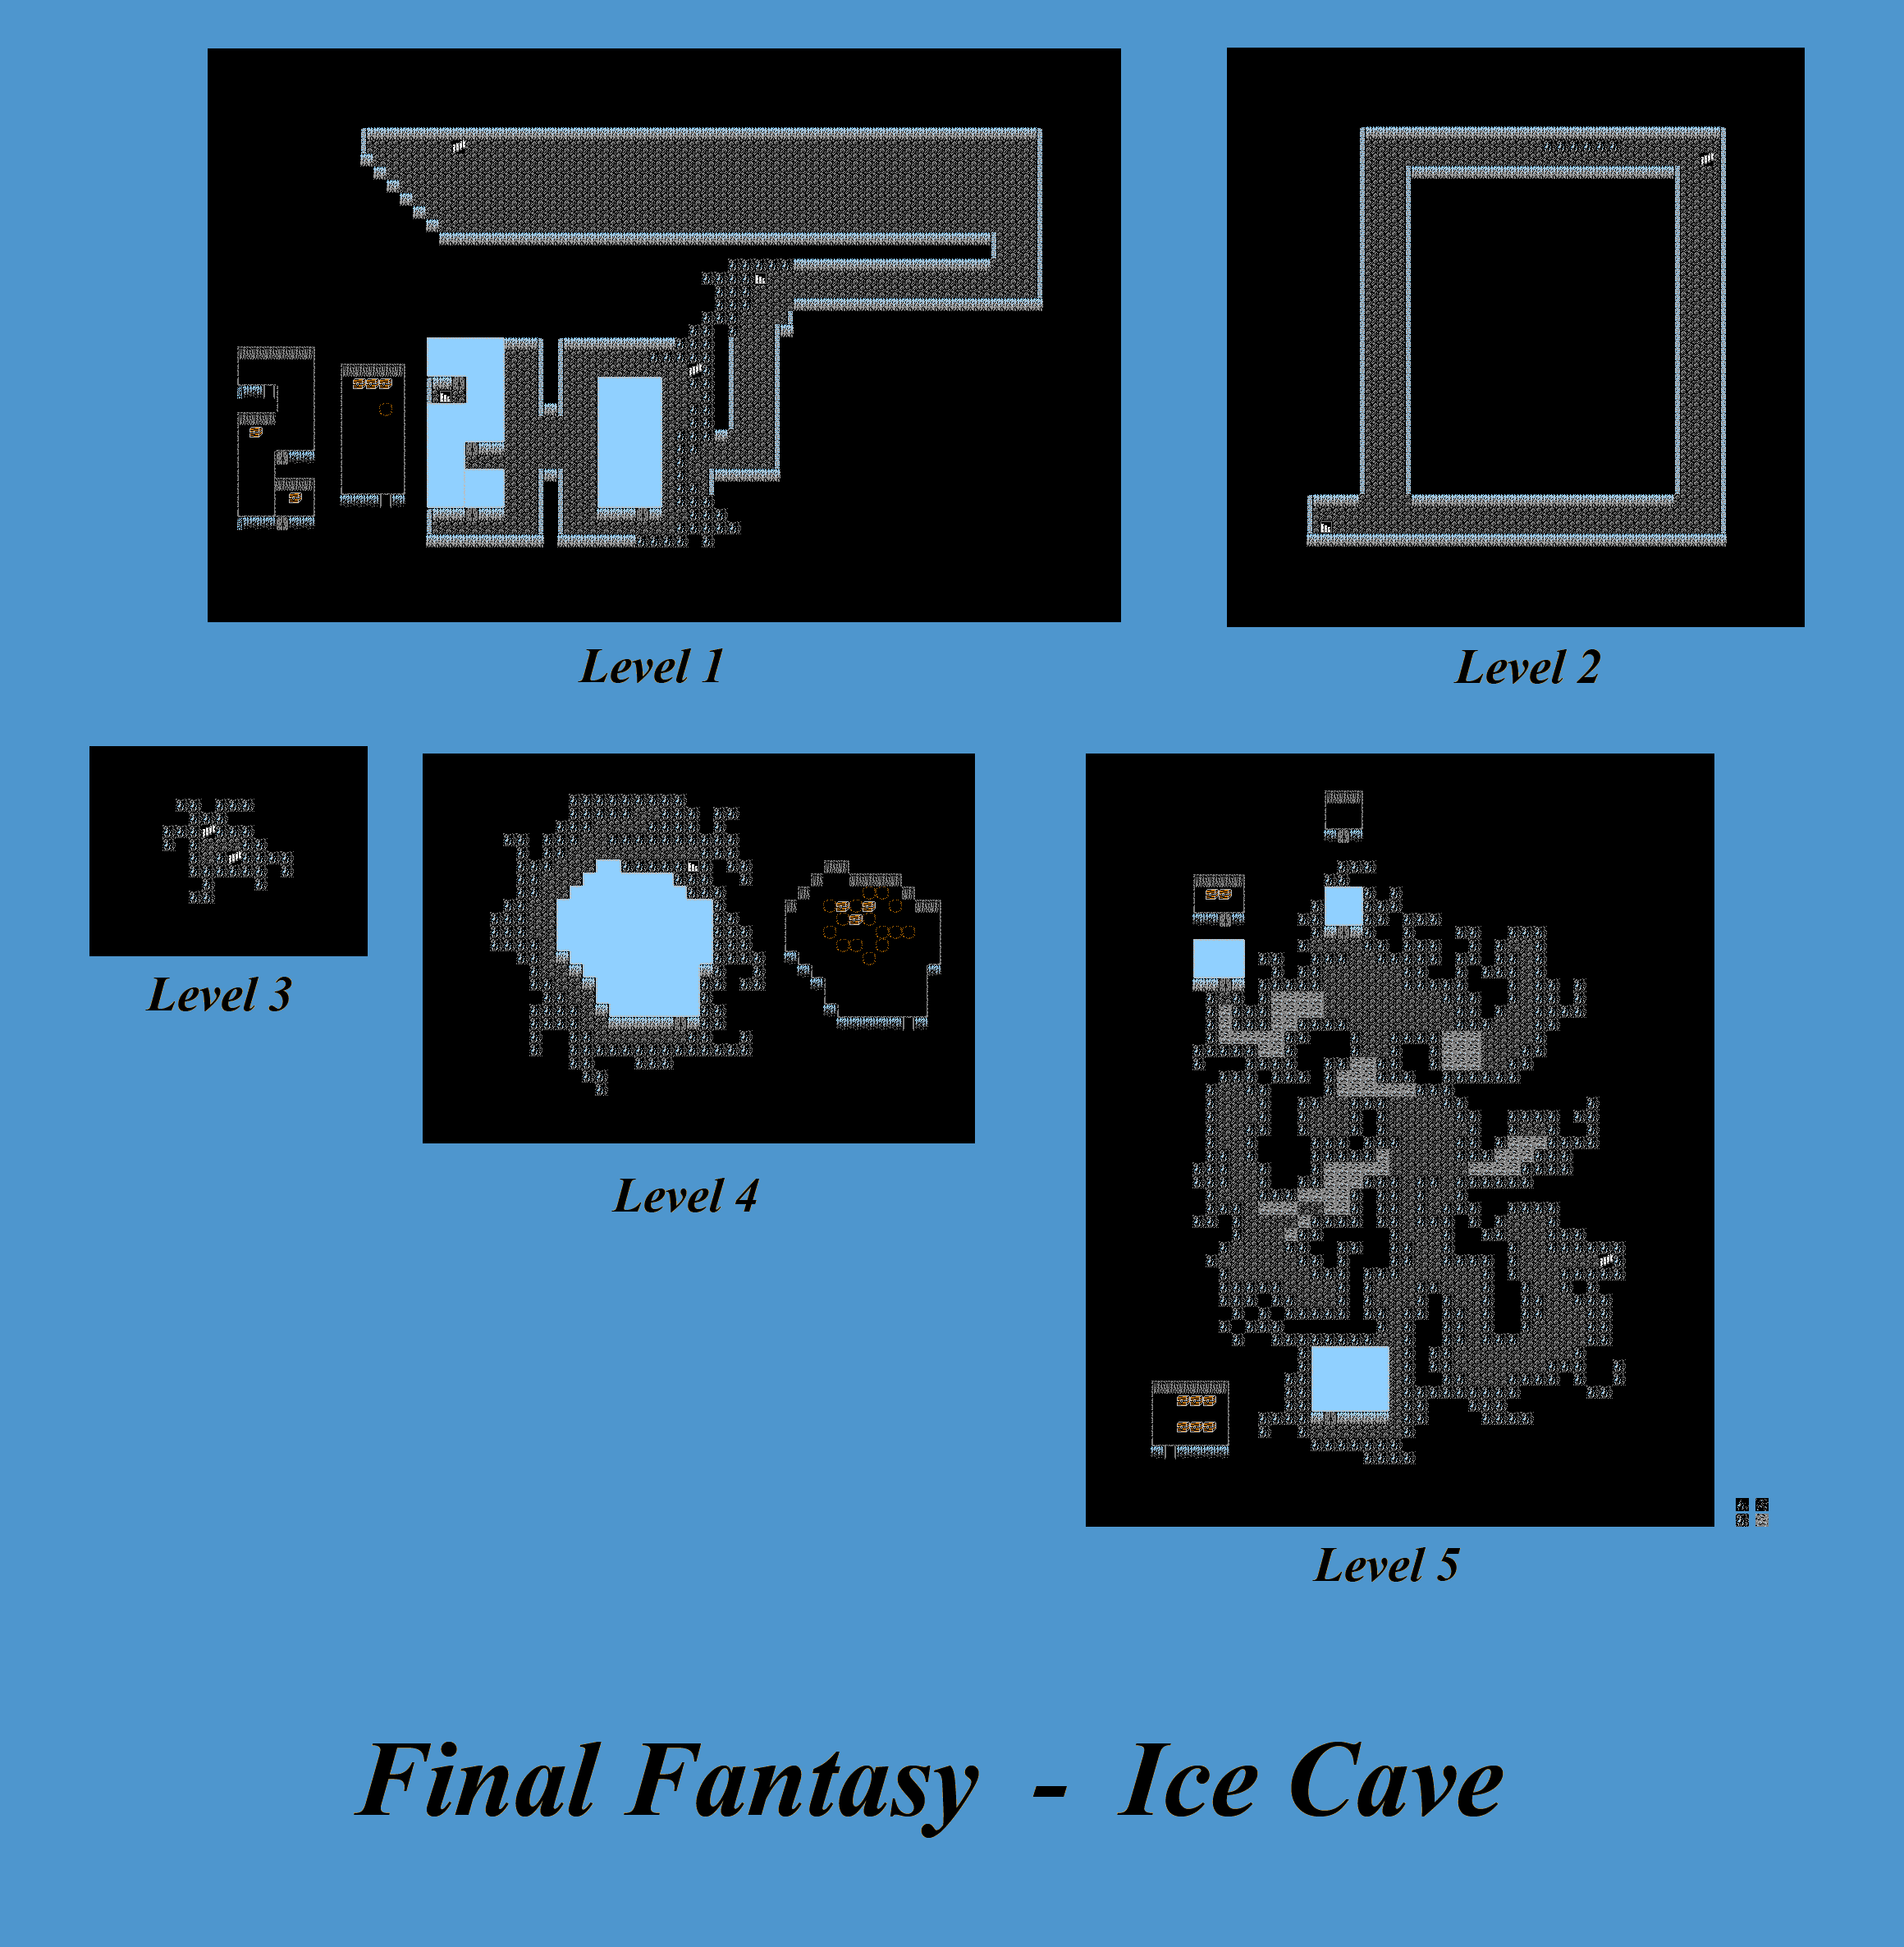 Final Fantasy - Ice Cave